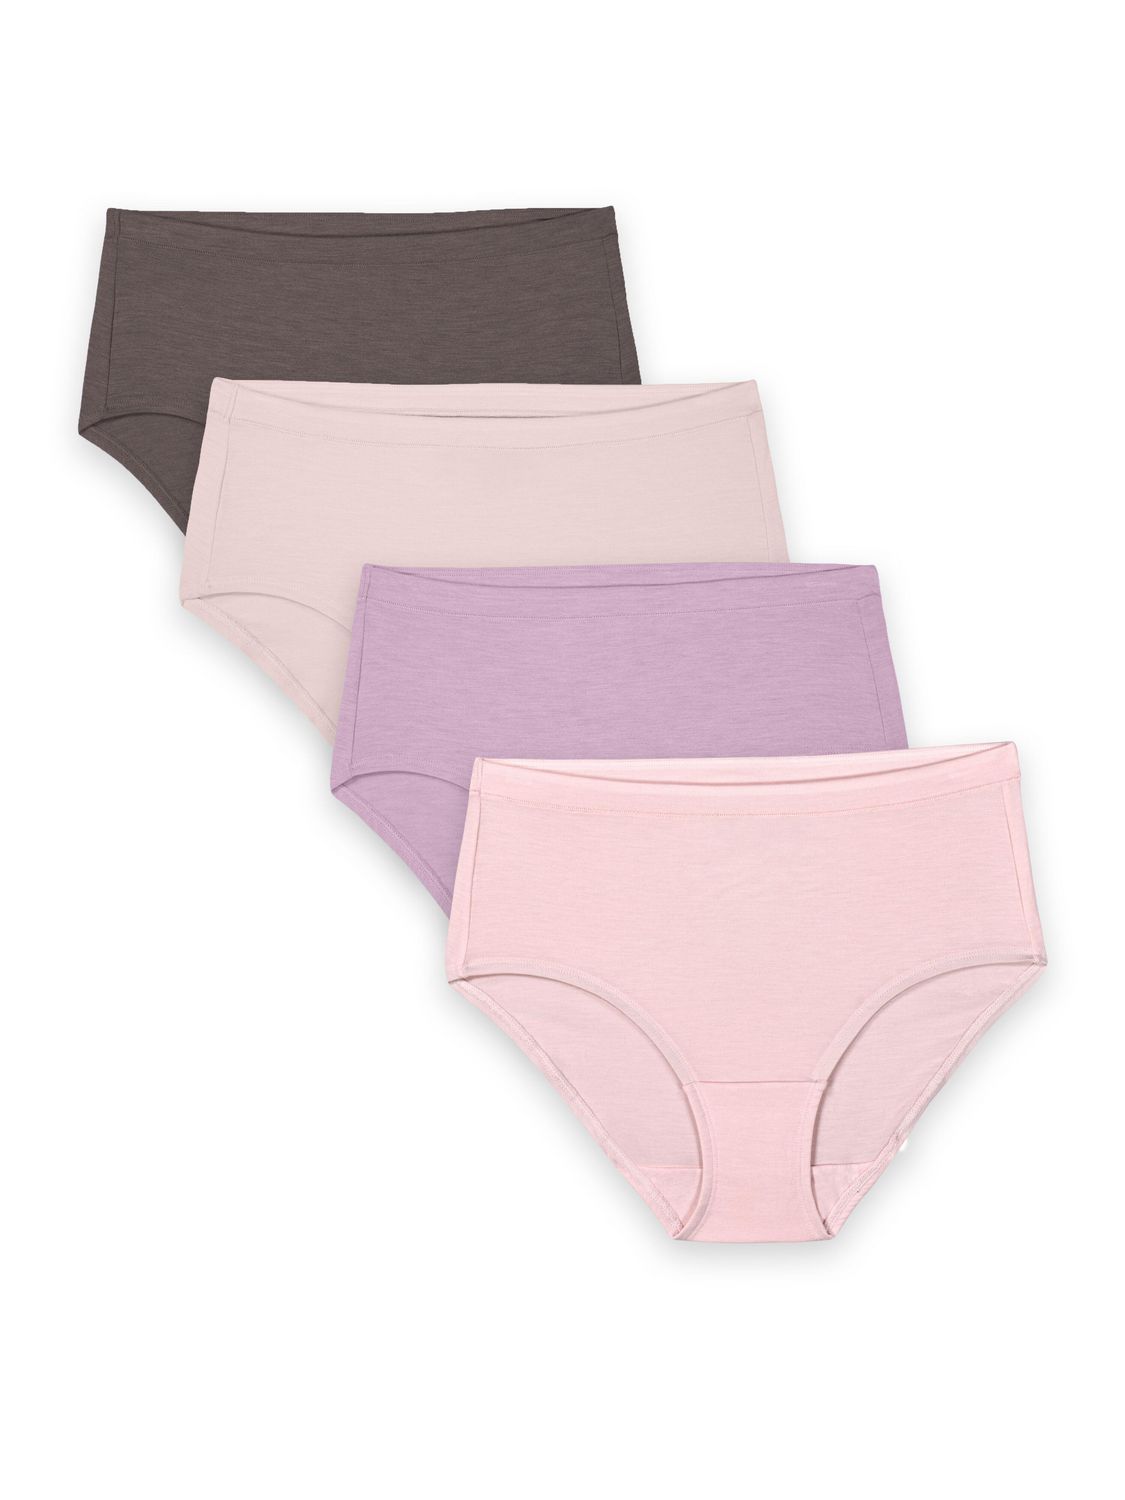 Fruit of the Loom Women's Ultra Soft Modal Low-rise Brief, 4-Pack, Sizes:  9-13